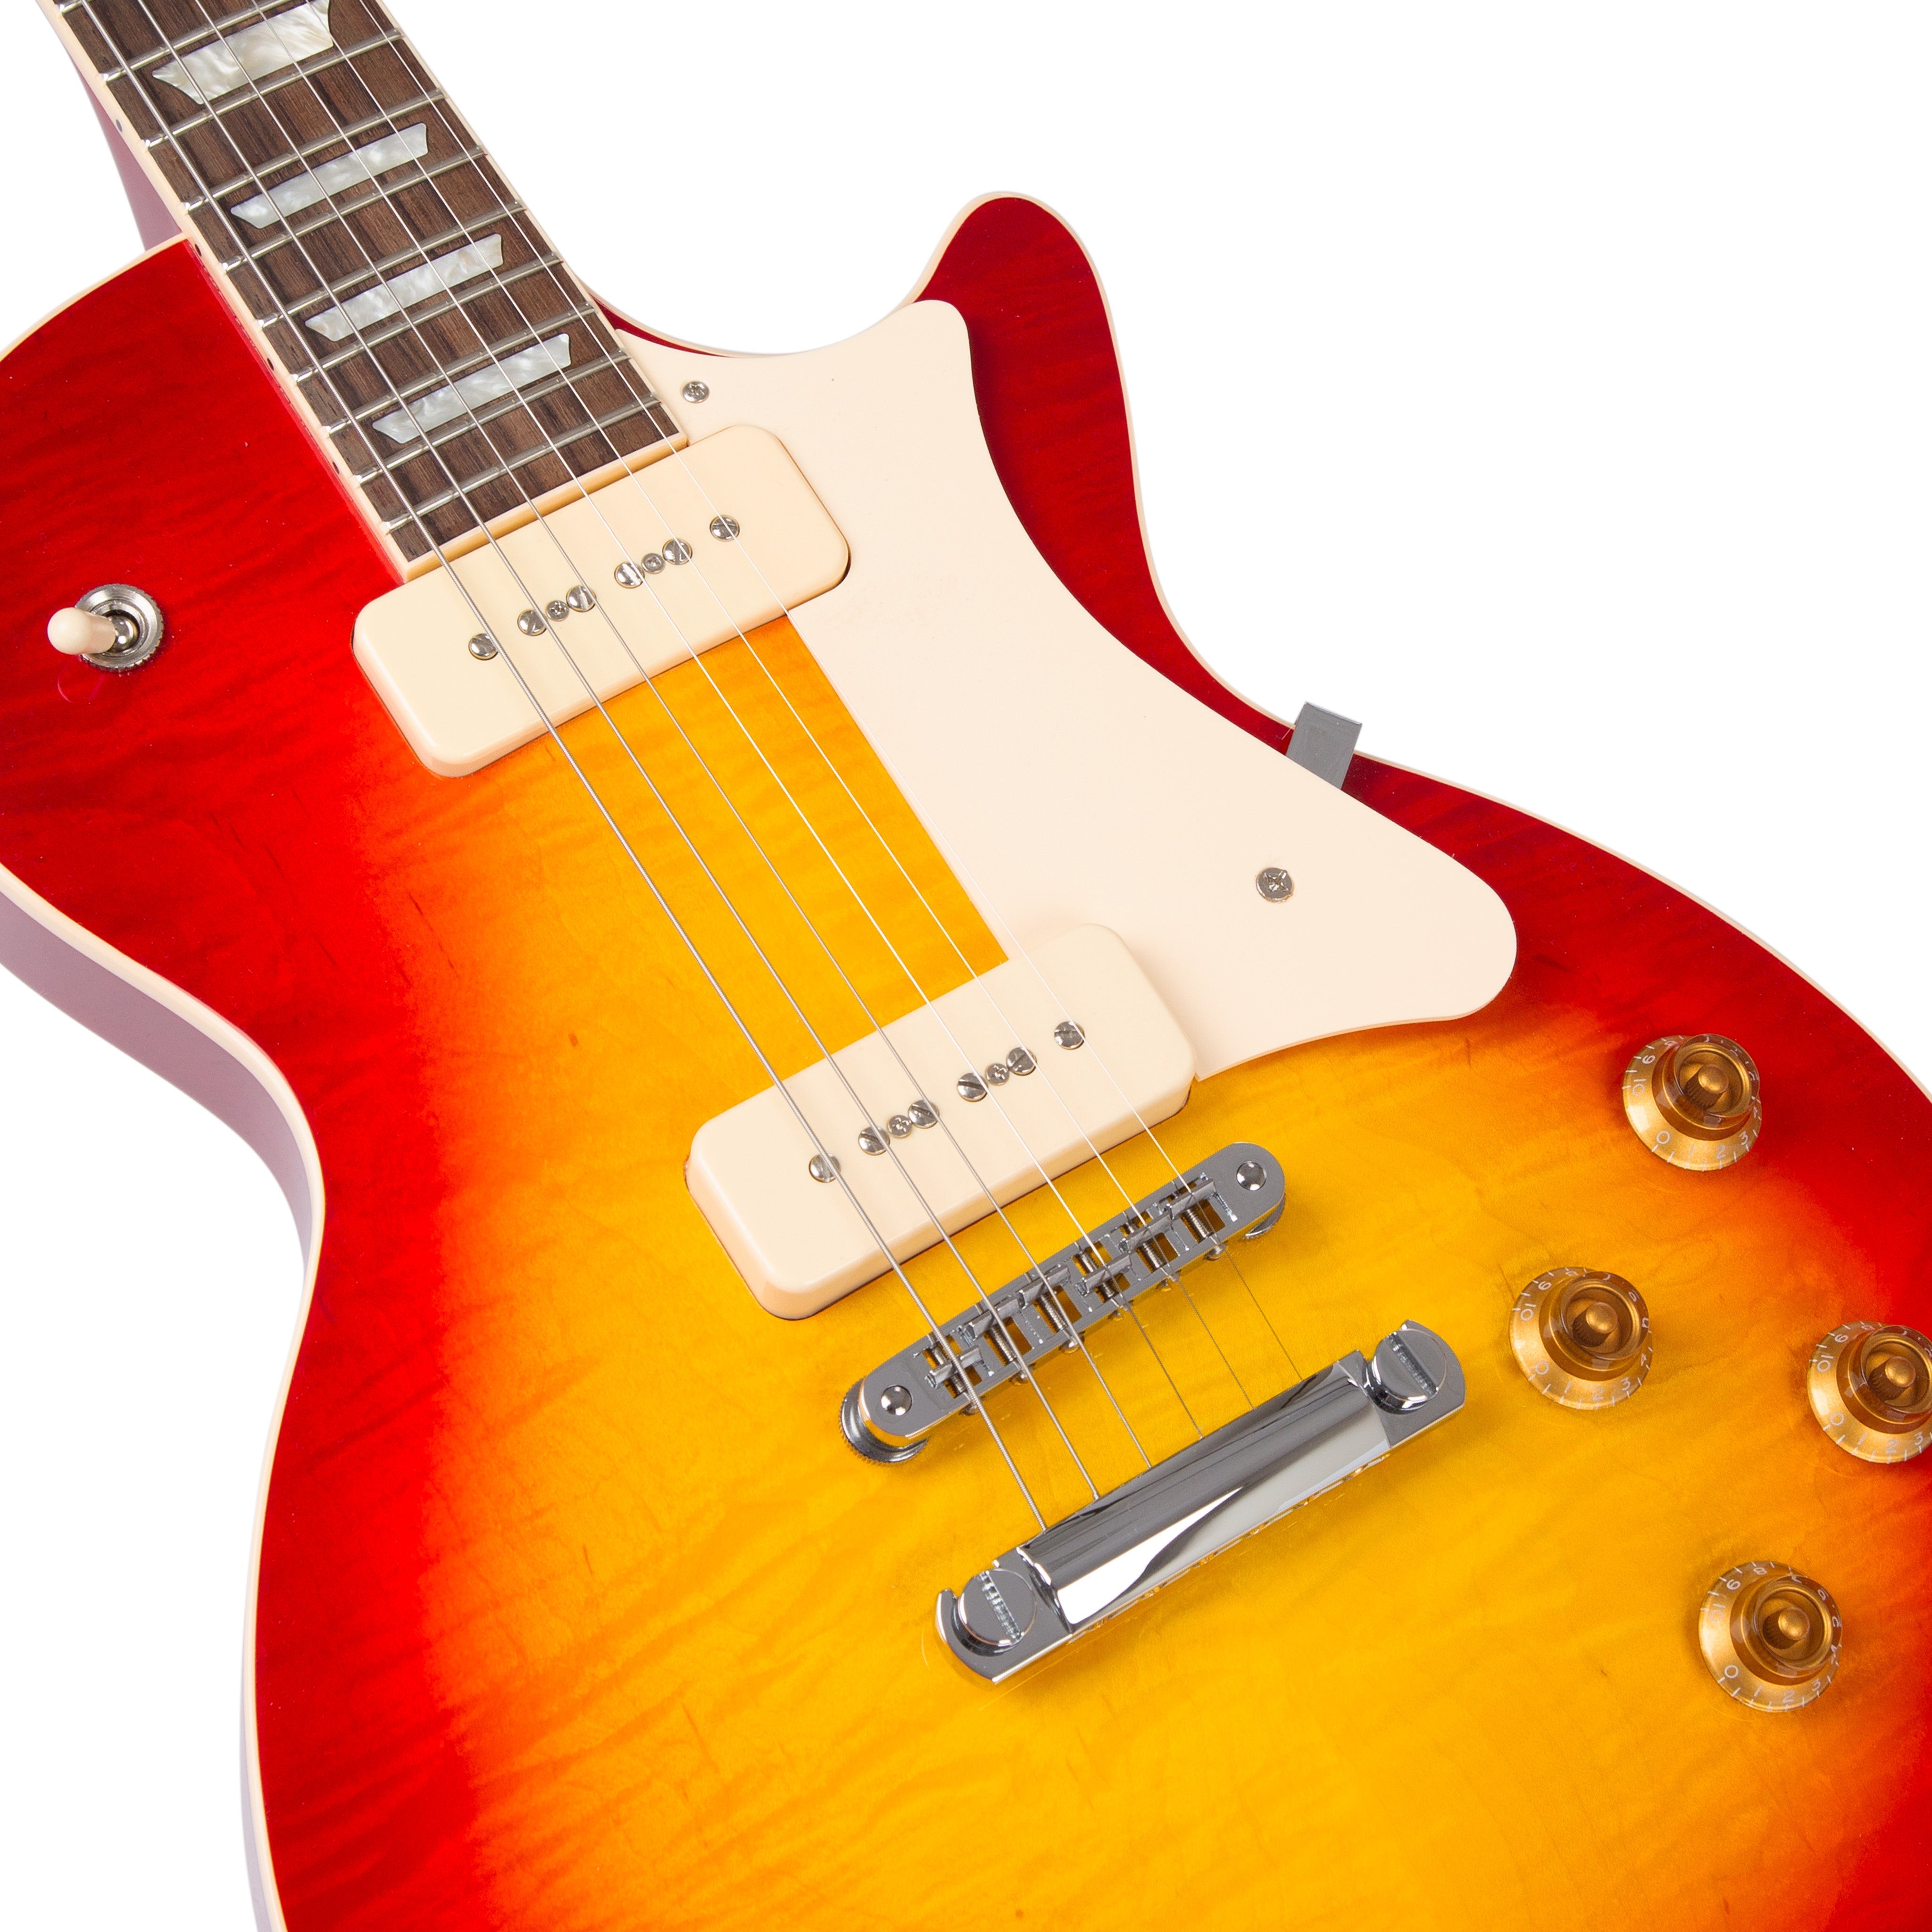 Heritage Standard Collection H-150 P90 Electric Guitar with Case, Vintage Cherry Sunburst